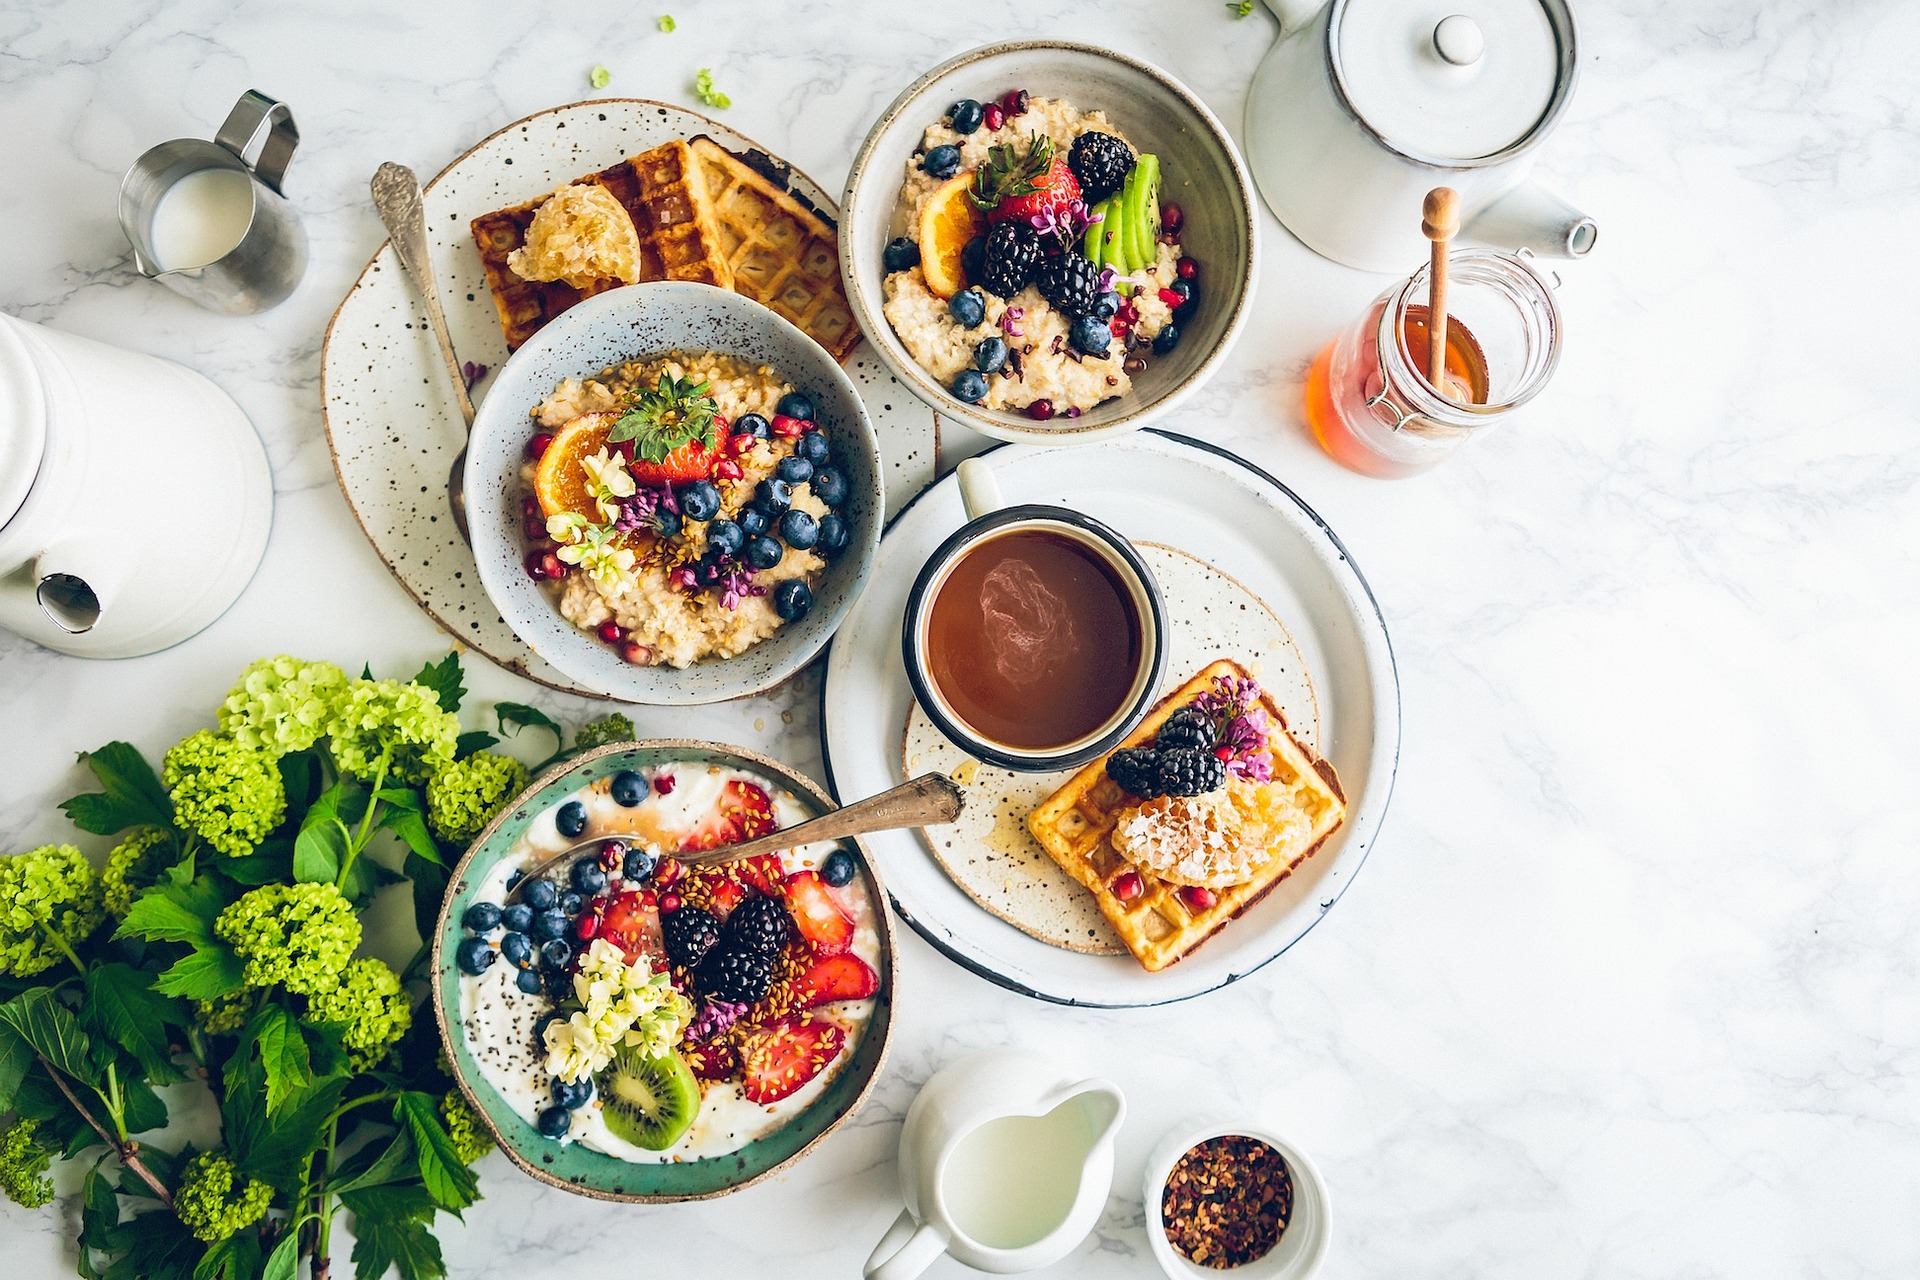 A bright and colorful spread of assorted breakfast foods